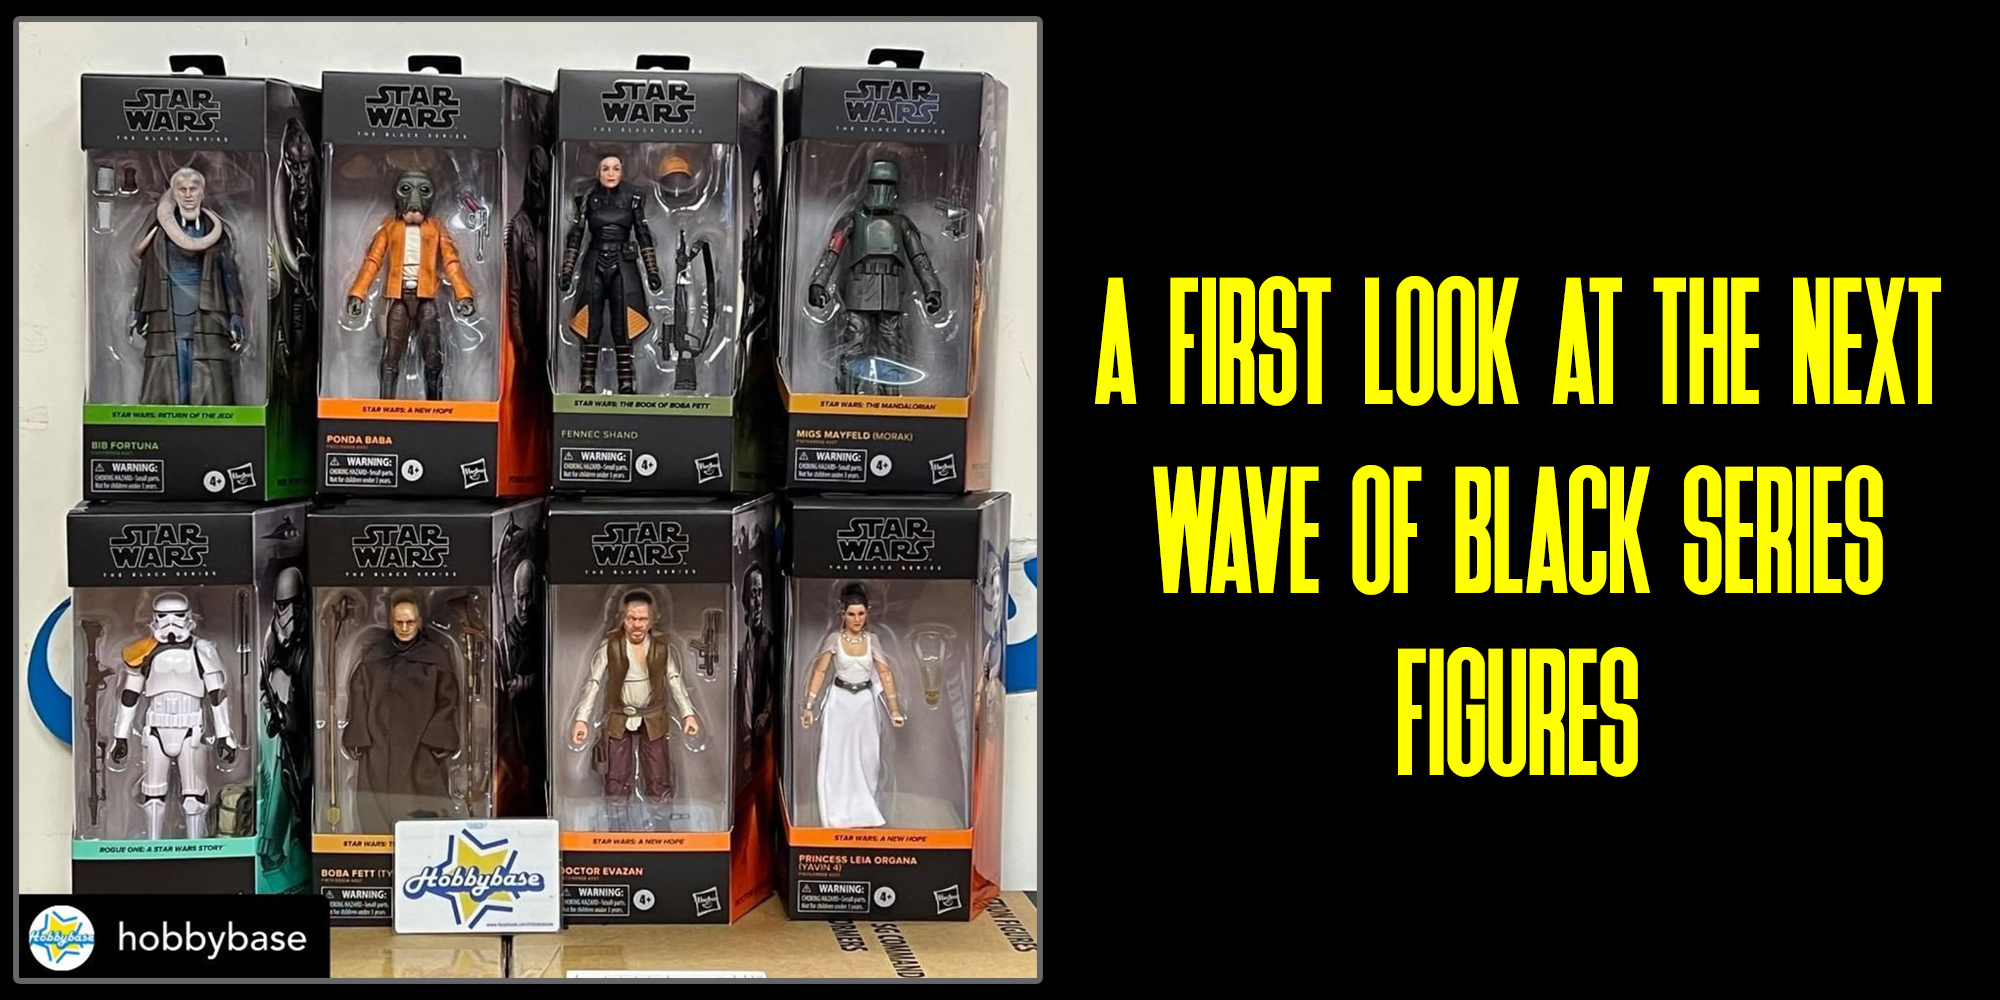 The next Star Wars The Black Series wave